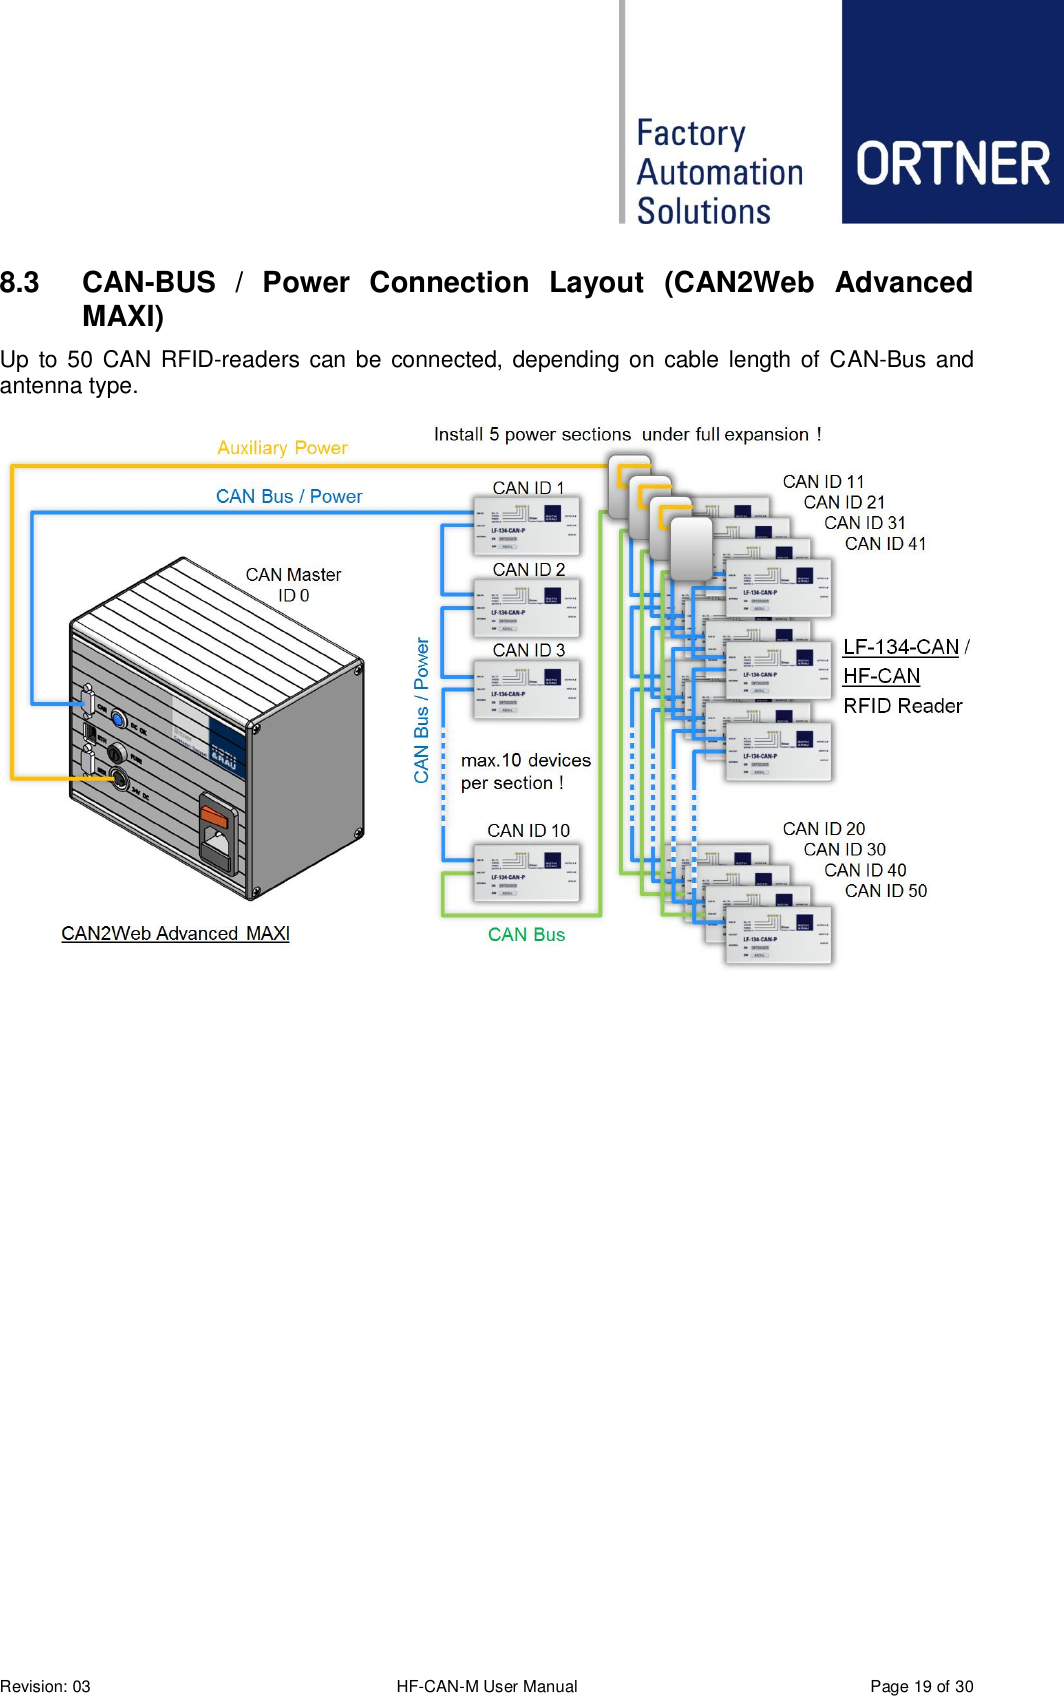  Revision: 03 HF-CAN-M User Manual  Page 19 of 30 8.3  CAN-BUS  /  Power  Connection  Layout  (CAN2Web  Advanced MAXI) Up  to 50 CAN RFID-readers can be  connected, depending on cable length of CAN-Bus and antenna type.     